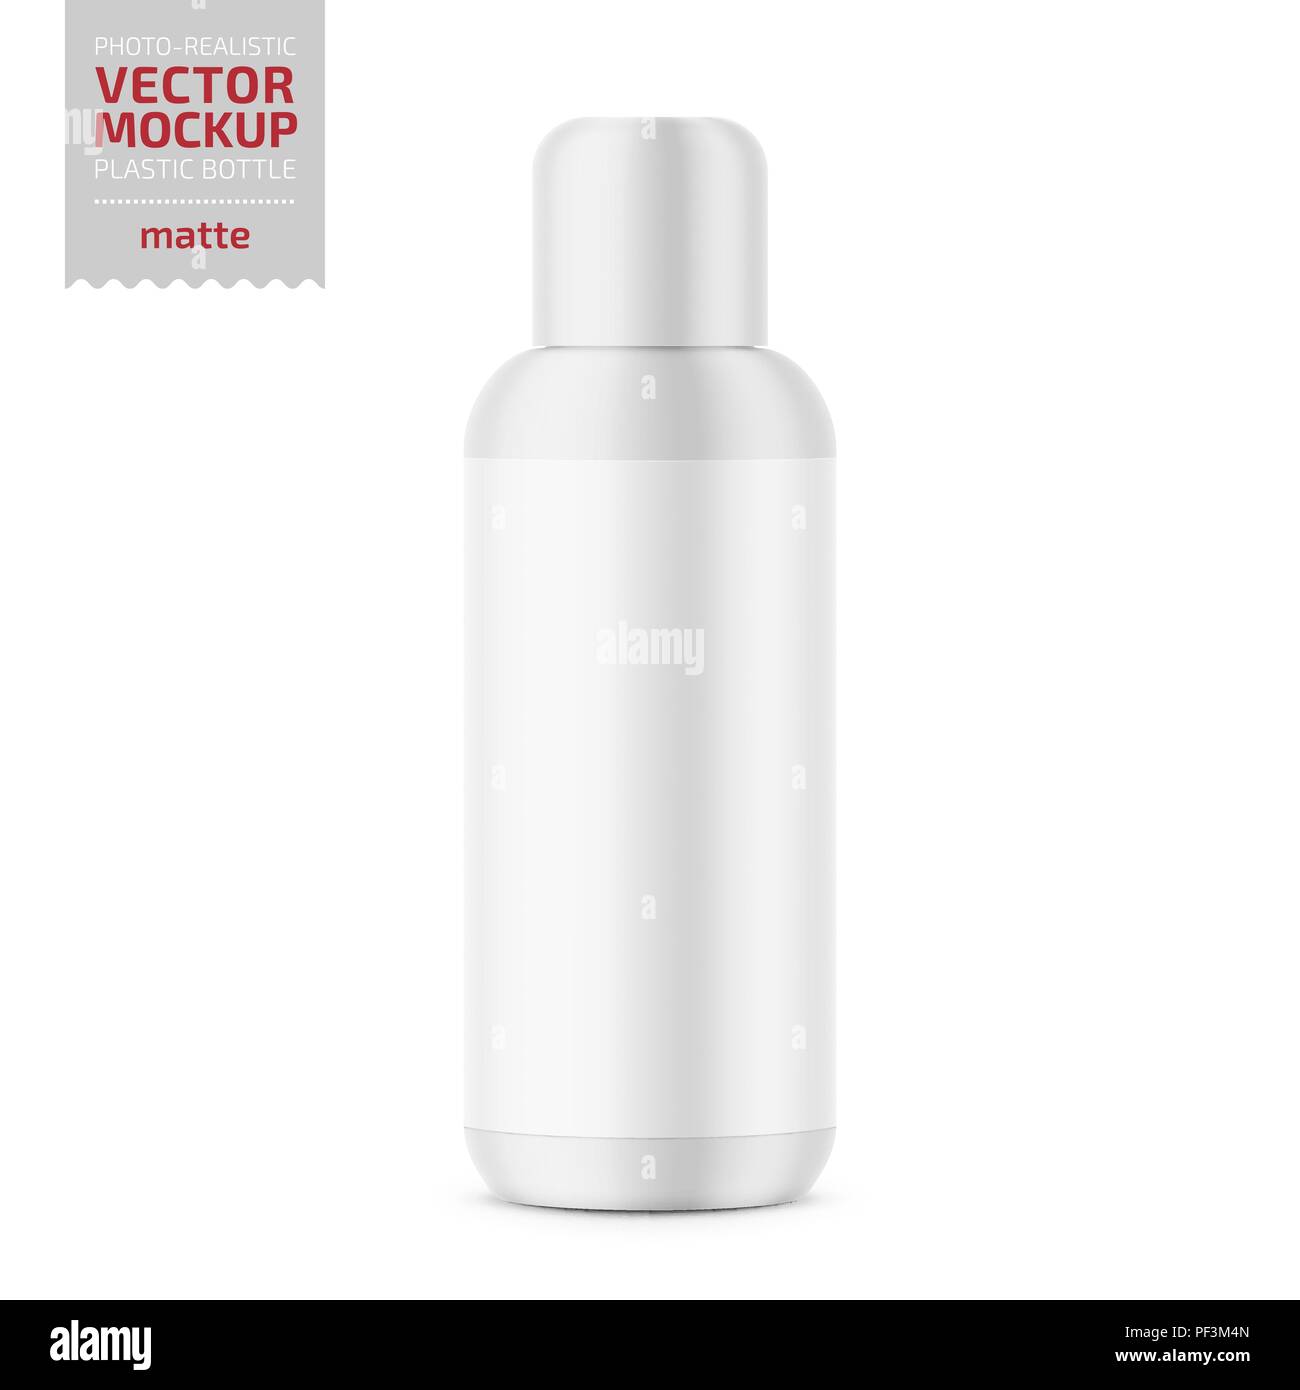 Download White Matte Plastic Cosmetic Bottle With Label 200 Ml Cosmo Round Style For Lotion Body Milk Shampoo Etc Photorealistic Packaging Mockup Stock Vector Image Art Alamy